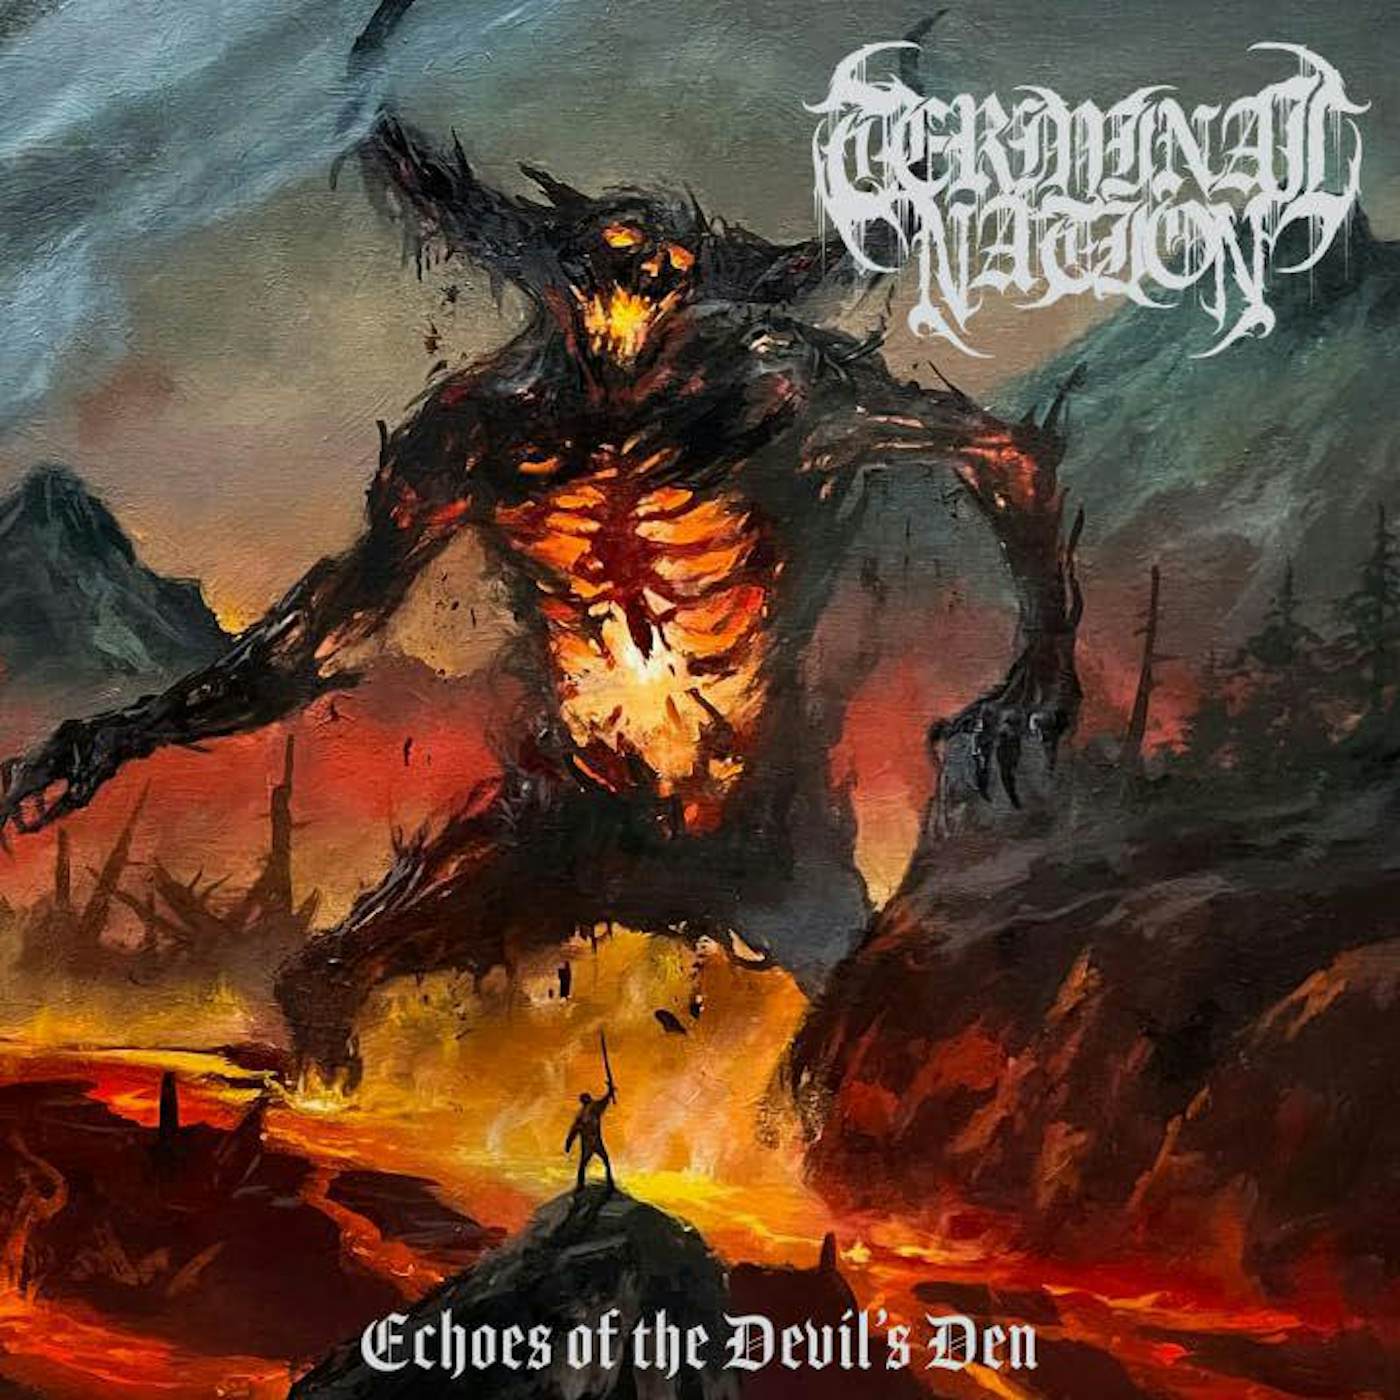 Terminal Nation Echoes Of The Devil's Den Vinyl Record